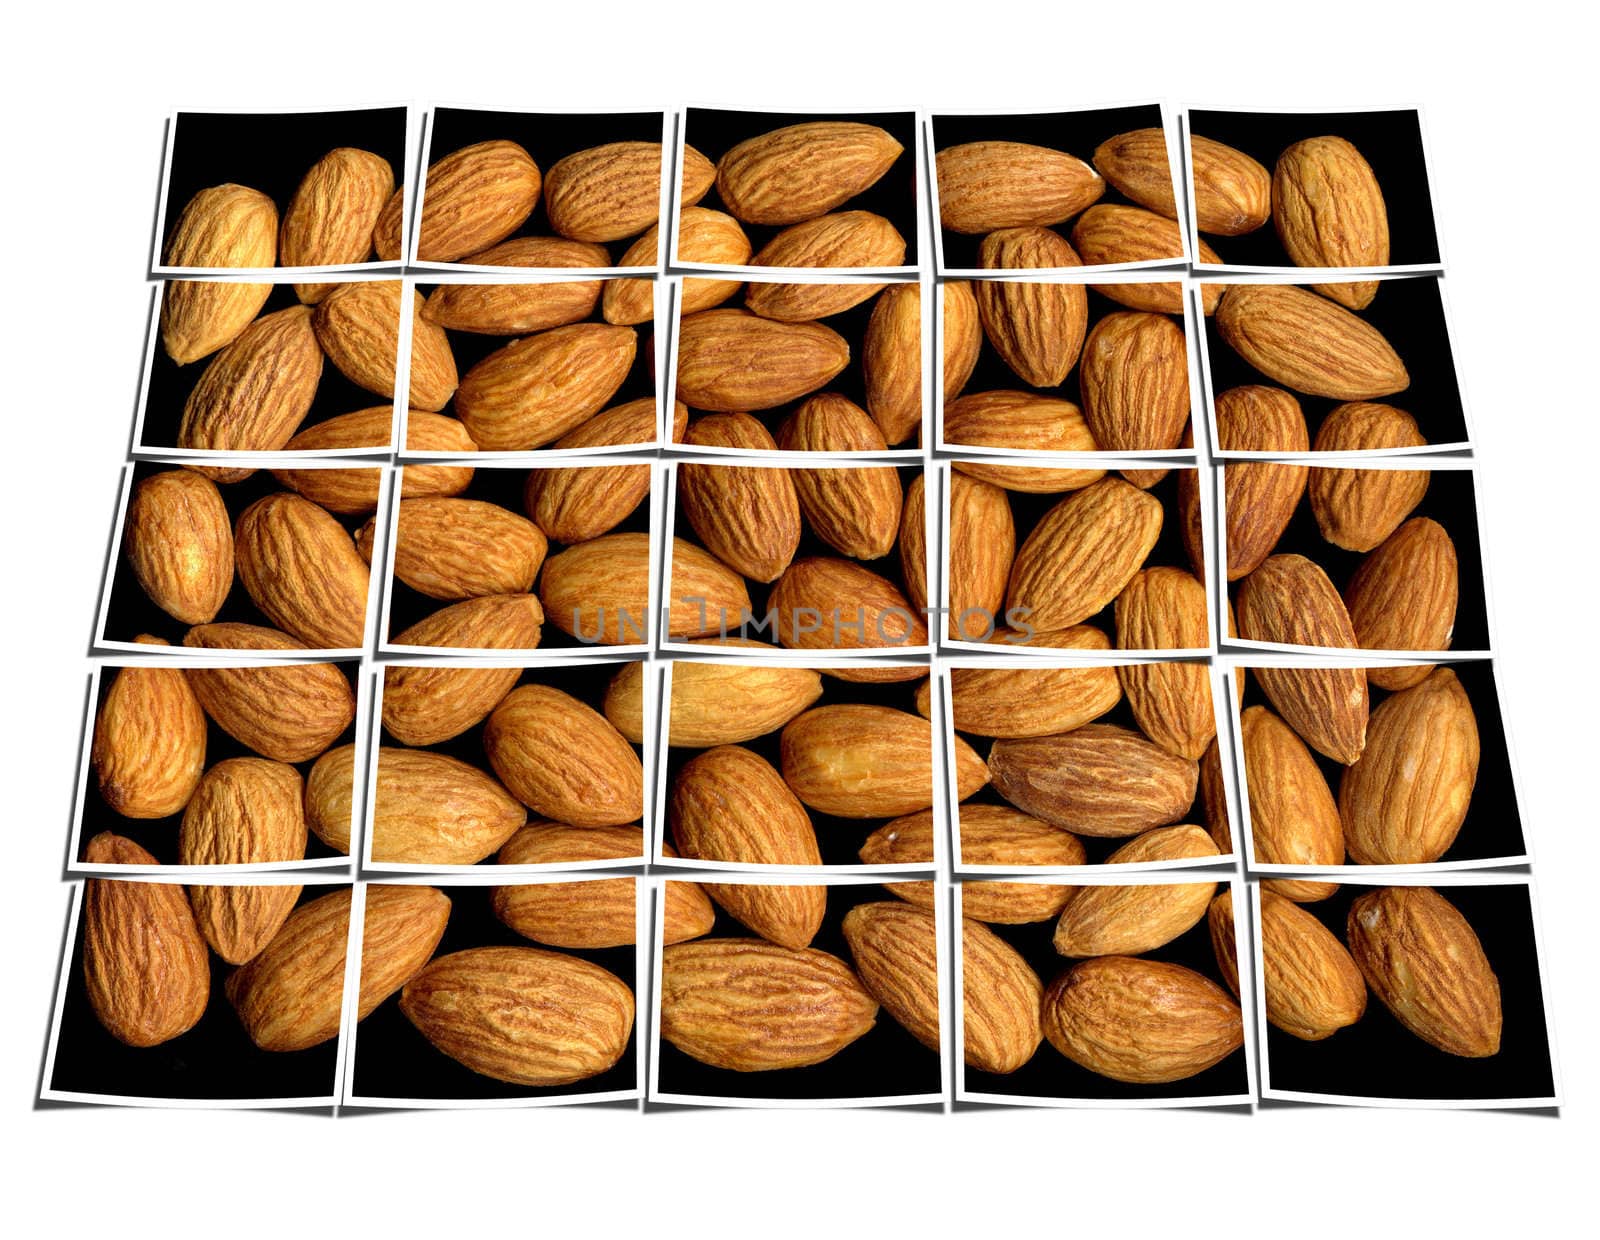 almonds collage  by keko64